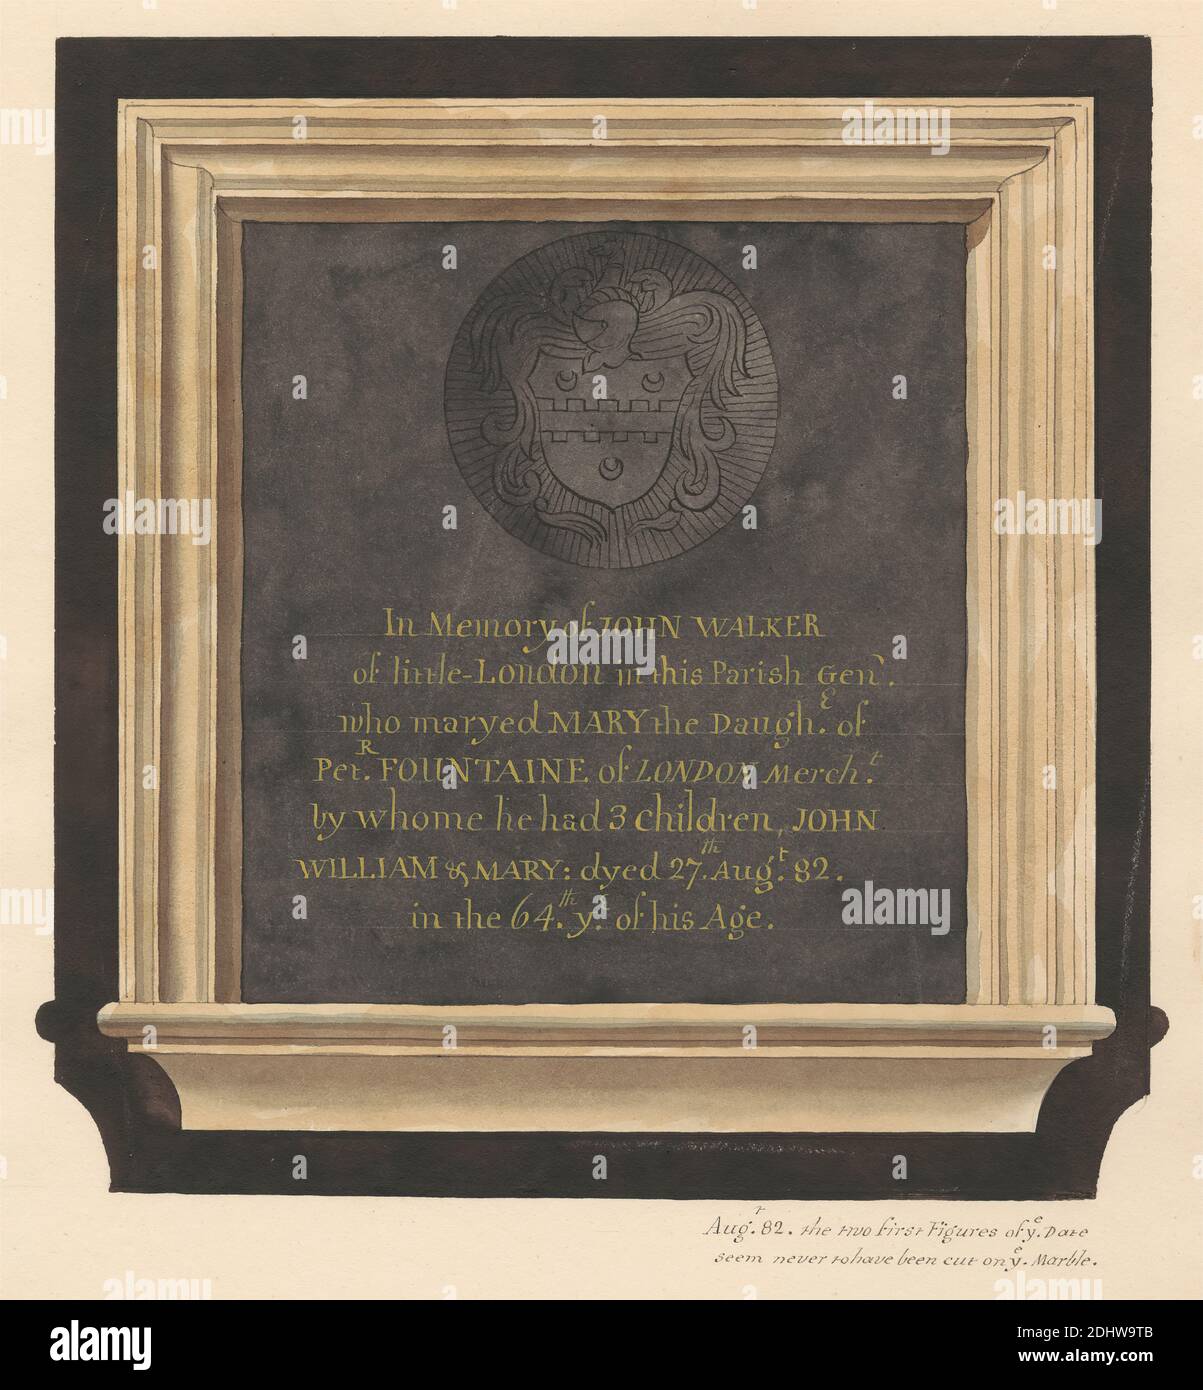 Memorial to John Walker from Hillingdon Church, Daniel Lysons, 1762–1834, British, between 1796 and 1811, Pen and black ink and watercolor and graphite on medium, slightly textured, cream wove paper, Sheet: 14 3/4 × 10 5/8 inches (37.5 × 27 cm), architectural subject, church, memorial, Church of St John the Baptist, England, Greater London, Hillingdon, London, United Kingdom Stock Photo